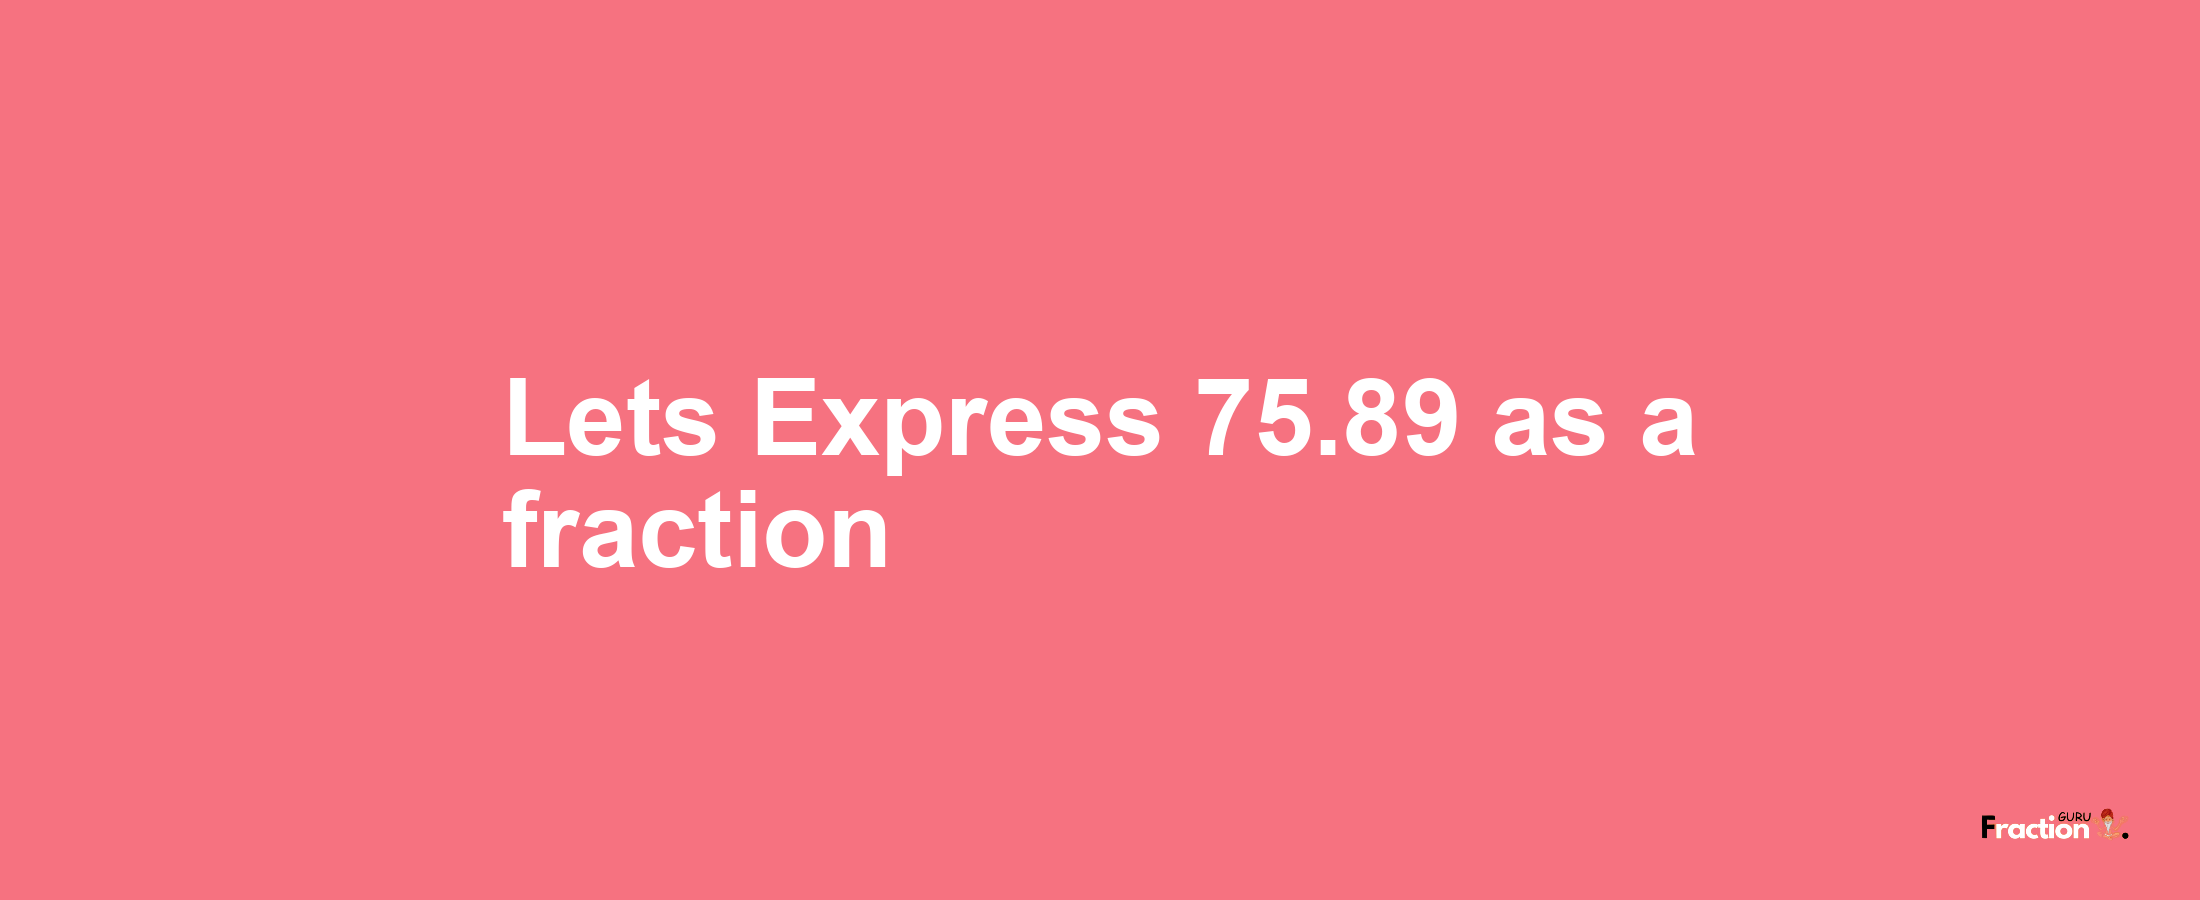 Lets Express 75.89 as afraction